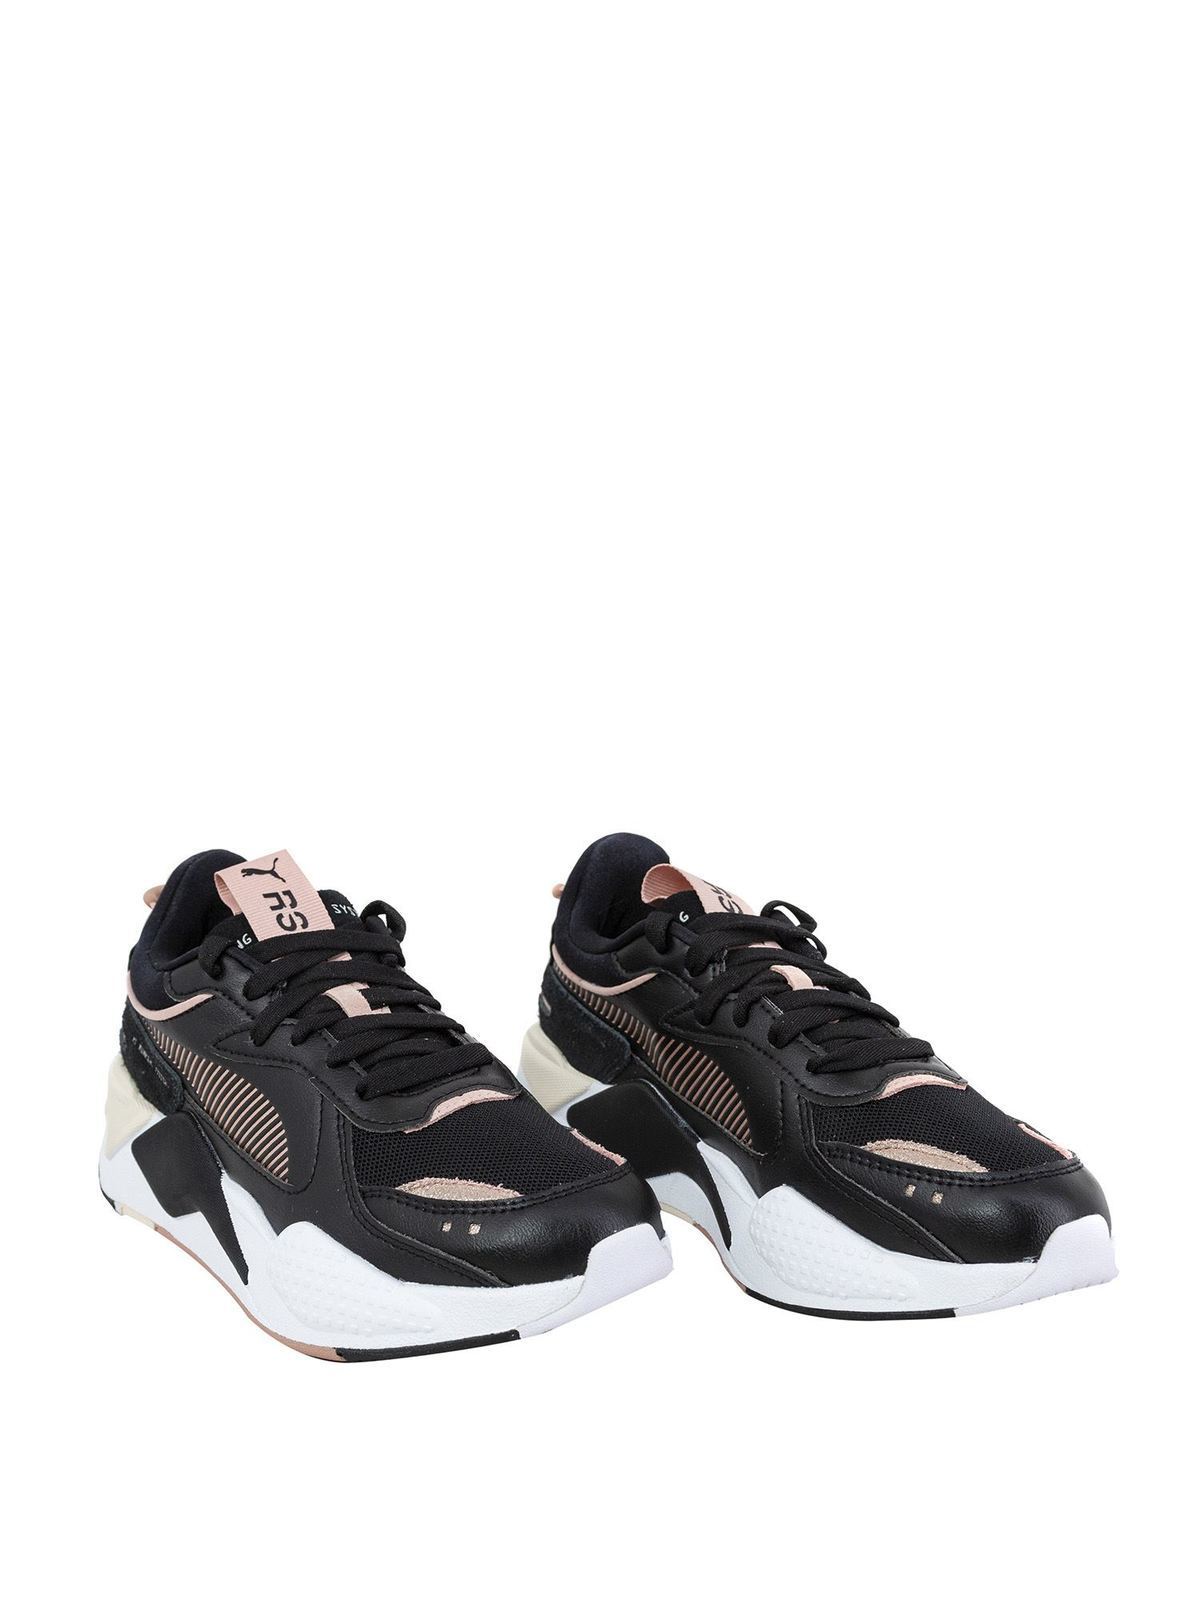 Trainers Puma - RS-X Mono Metal sneakers in black - 37466901 